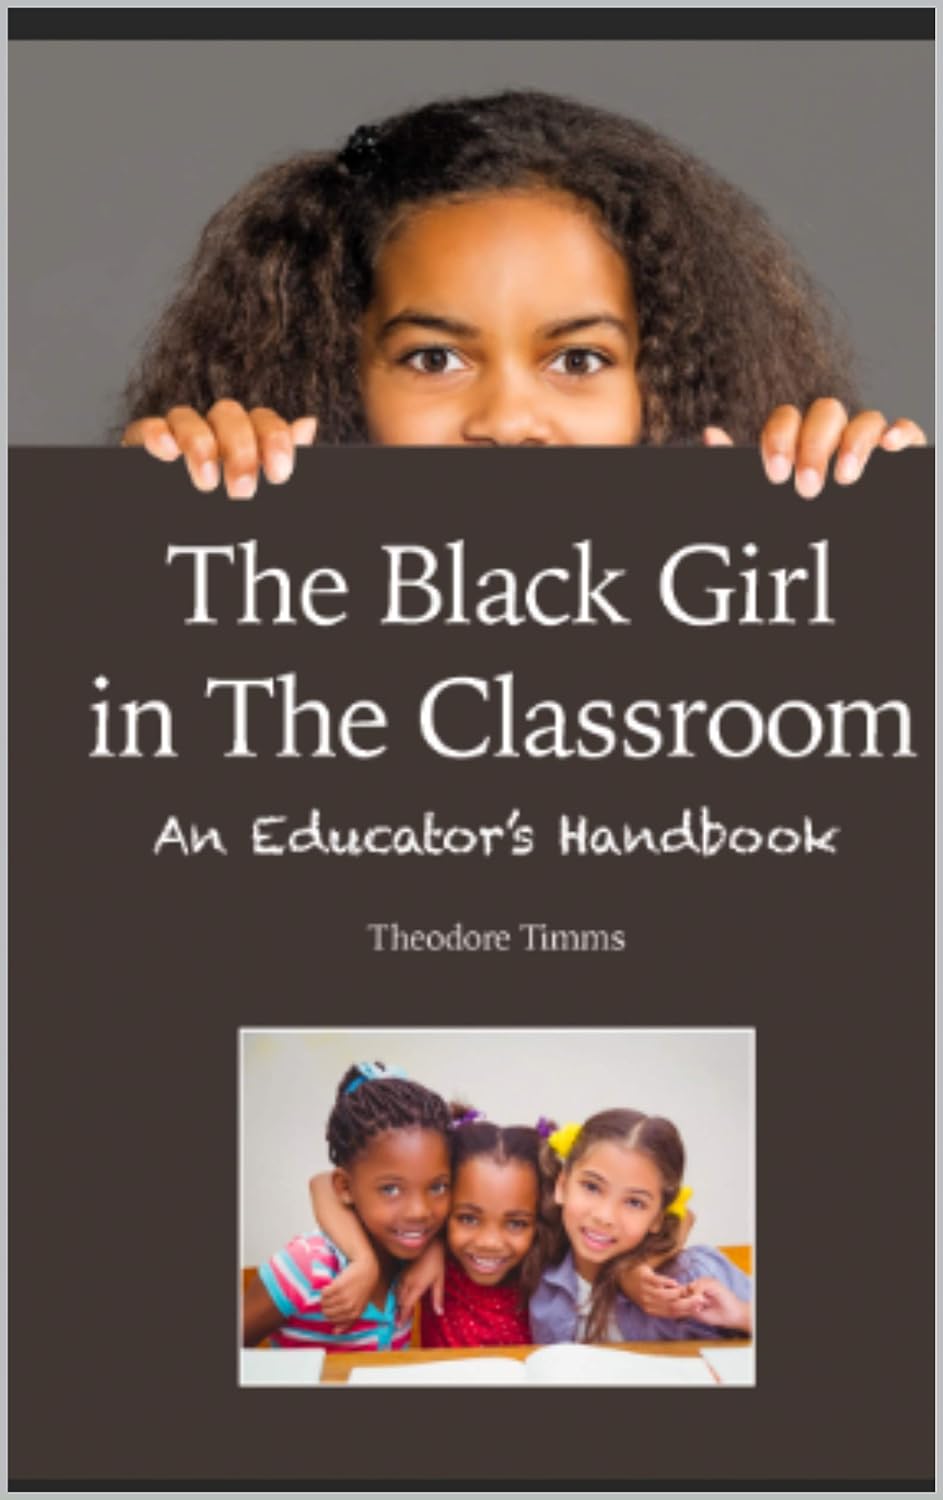 The Black Girl in the Classroom